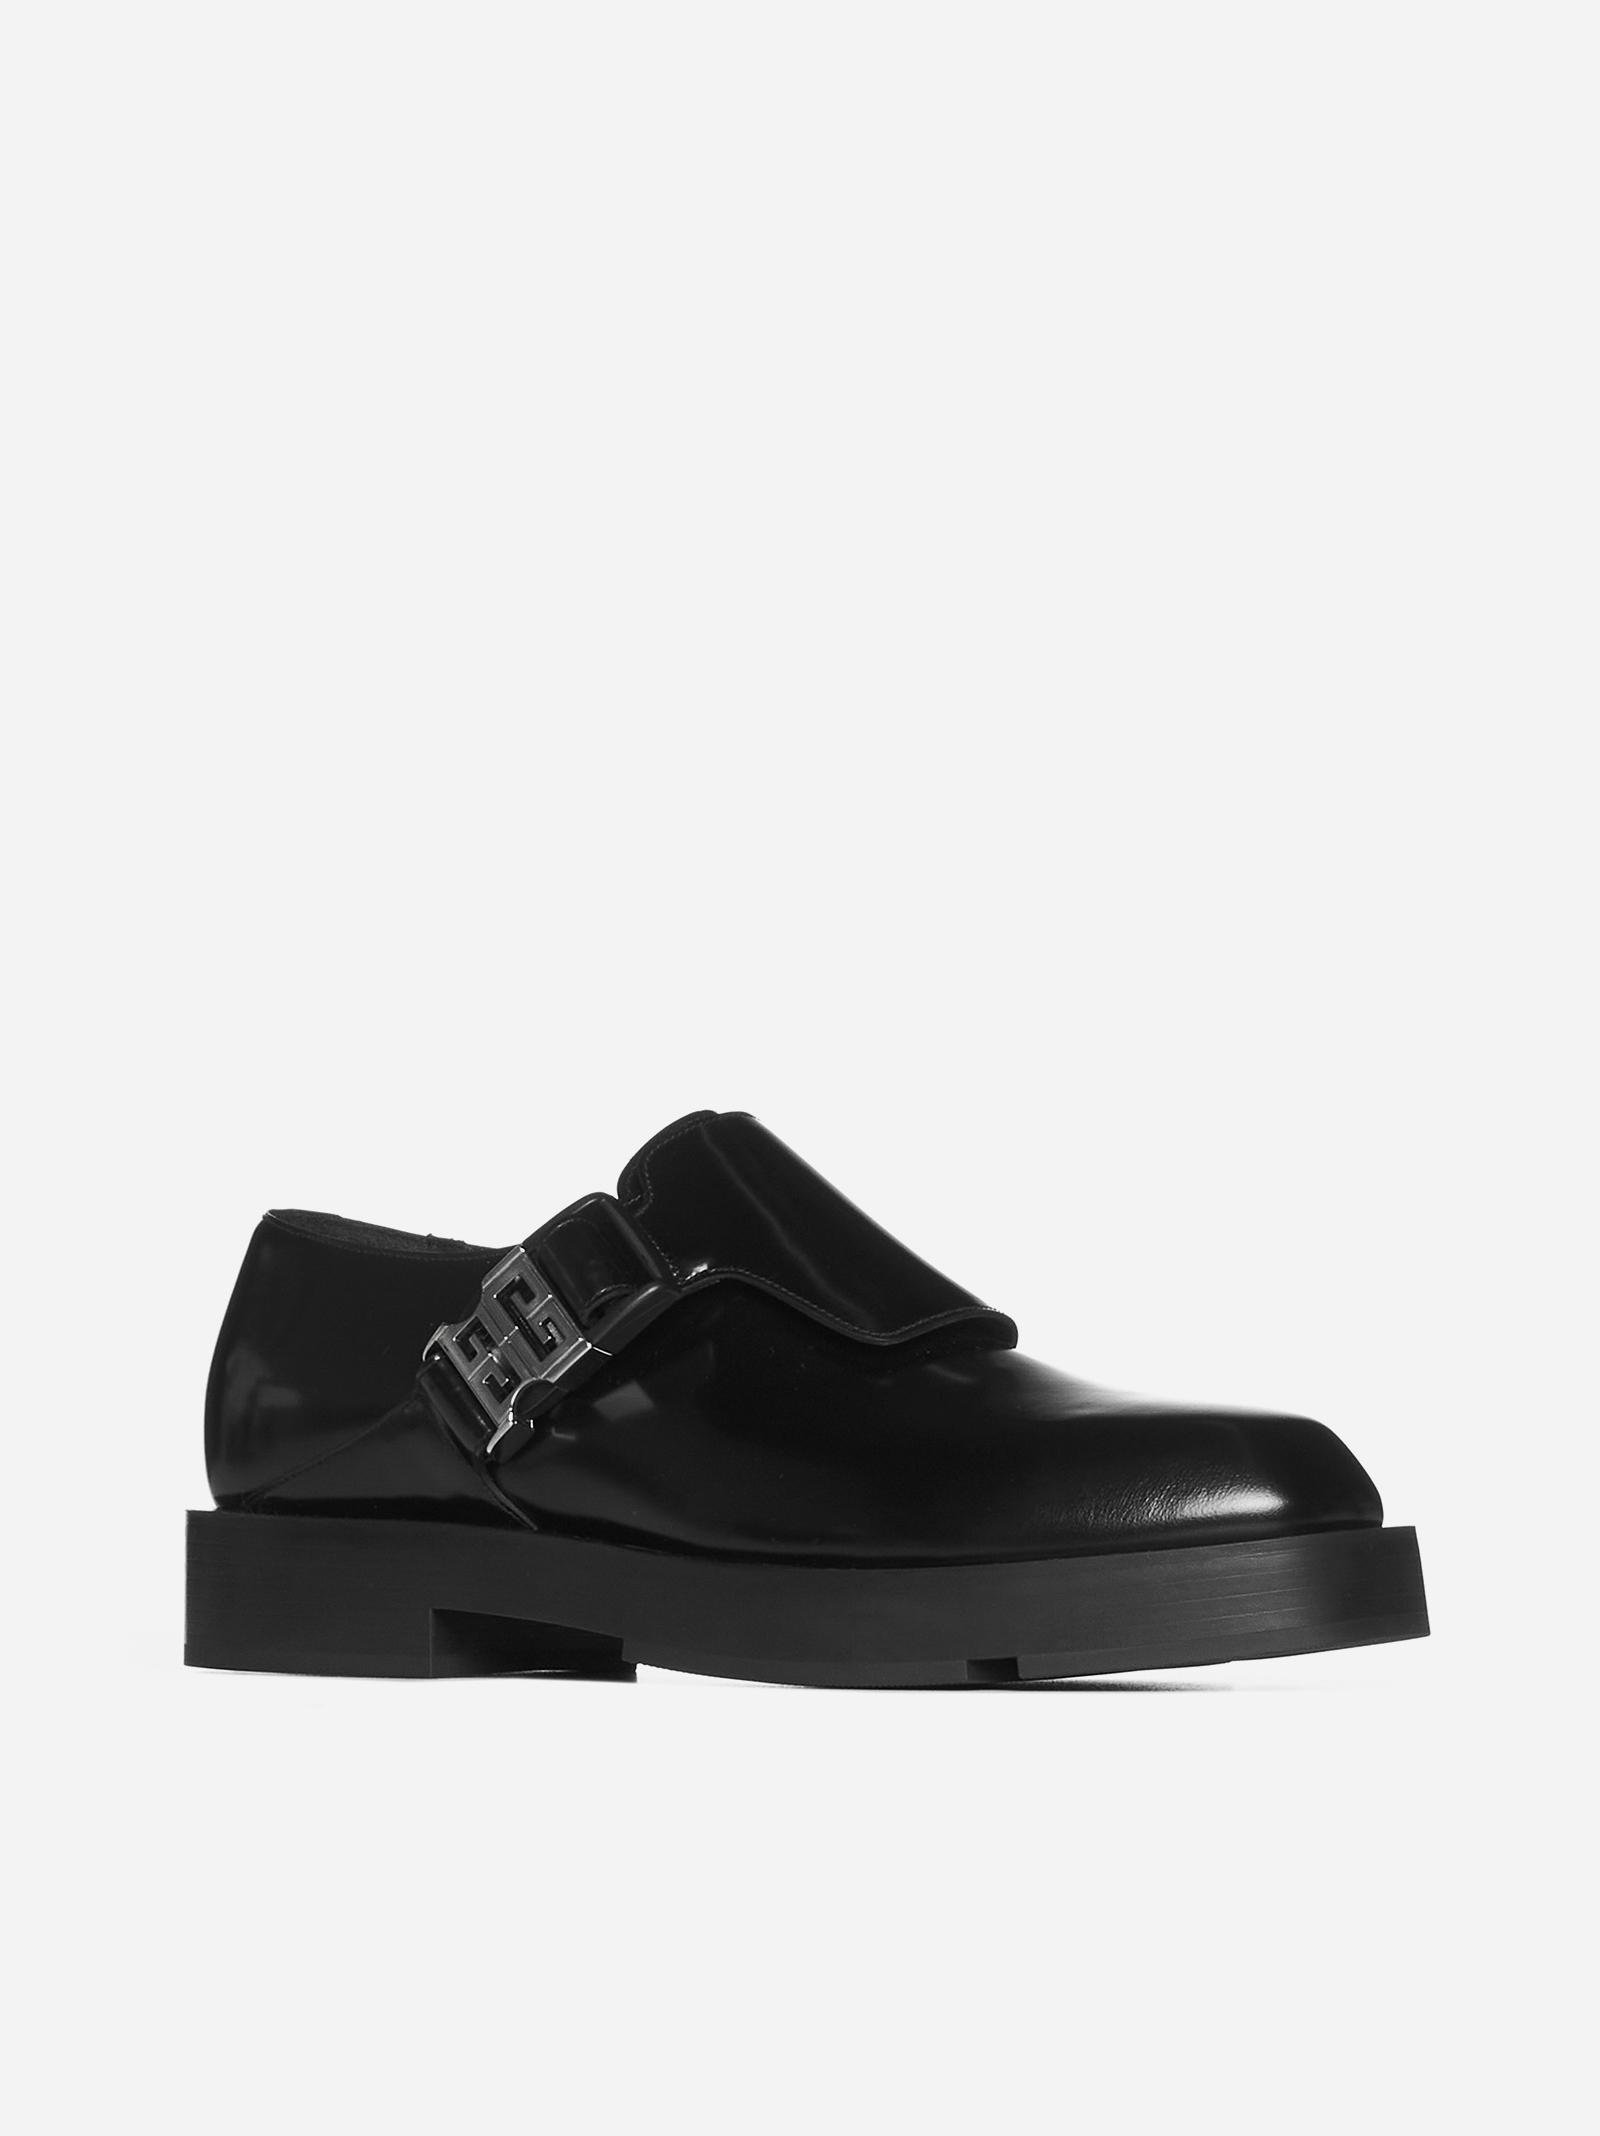 Givenchy Squared 4g Buckle Leather Derby Shoes in Black for Men | Lyst